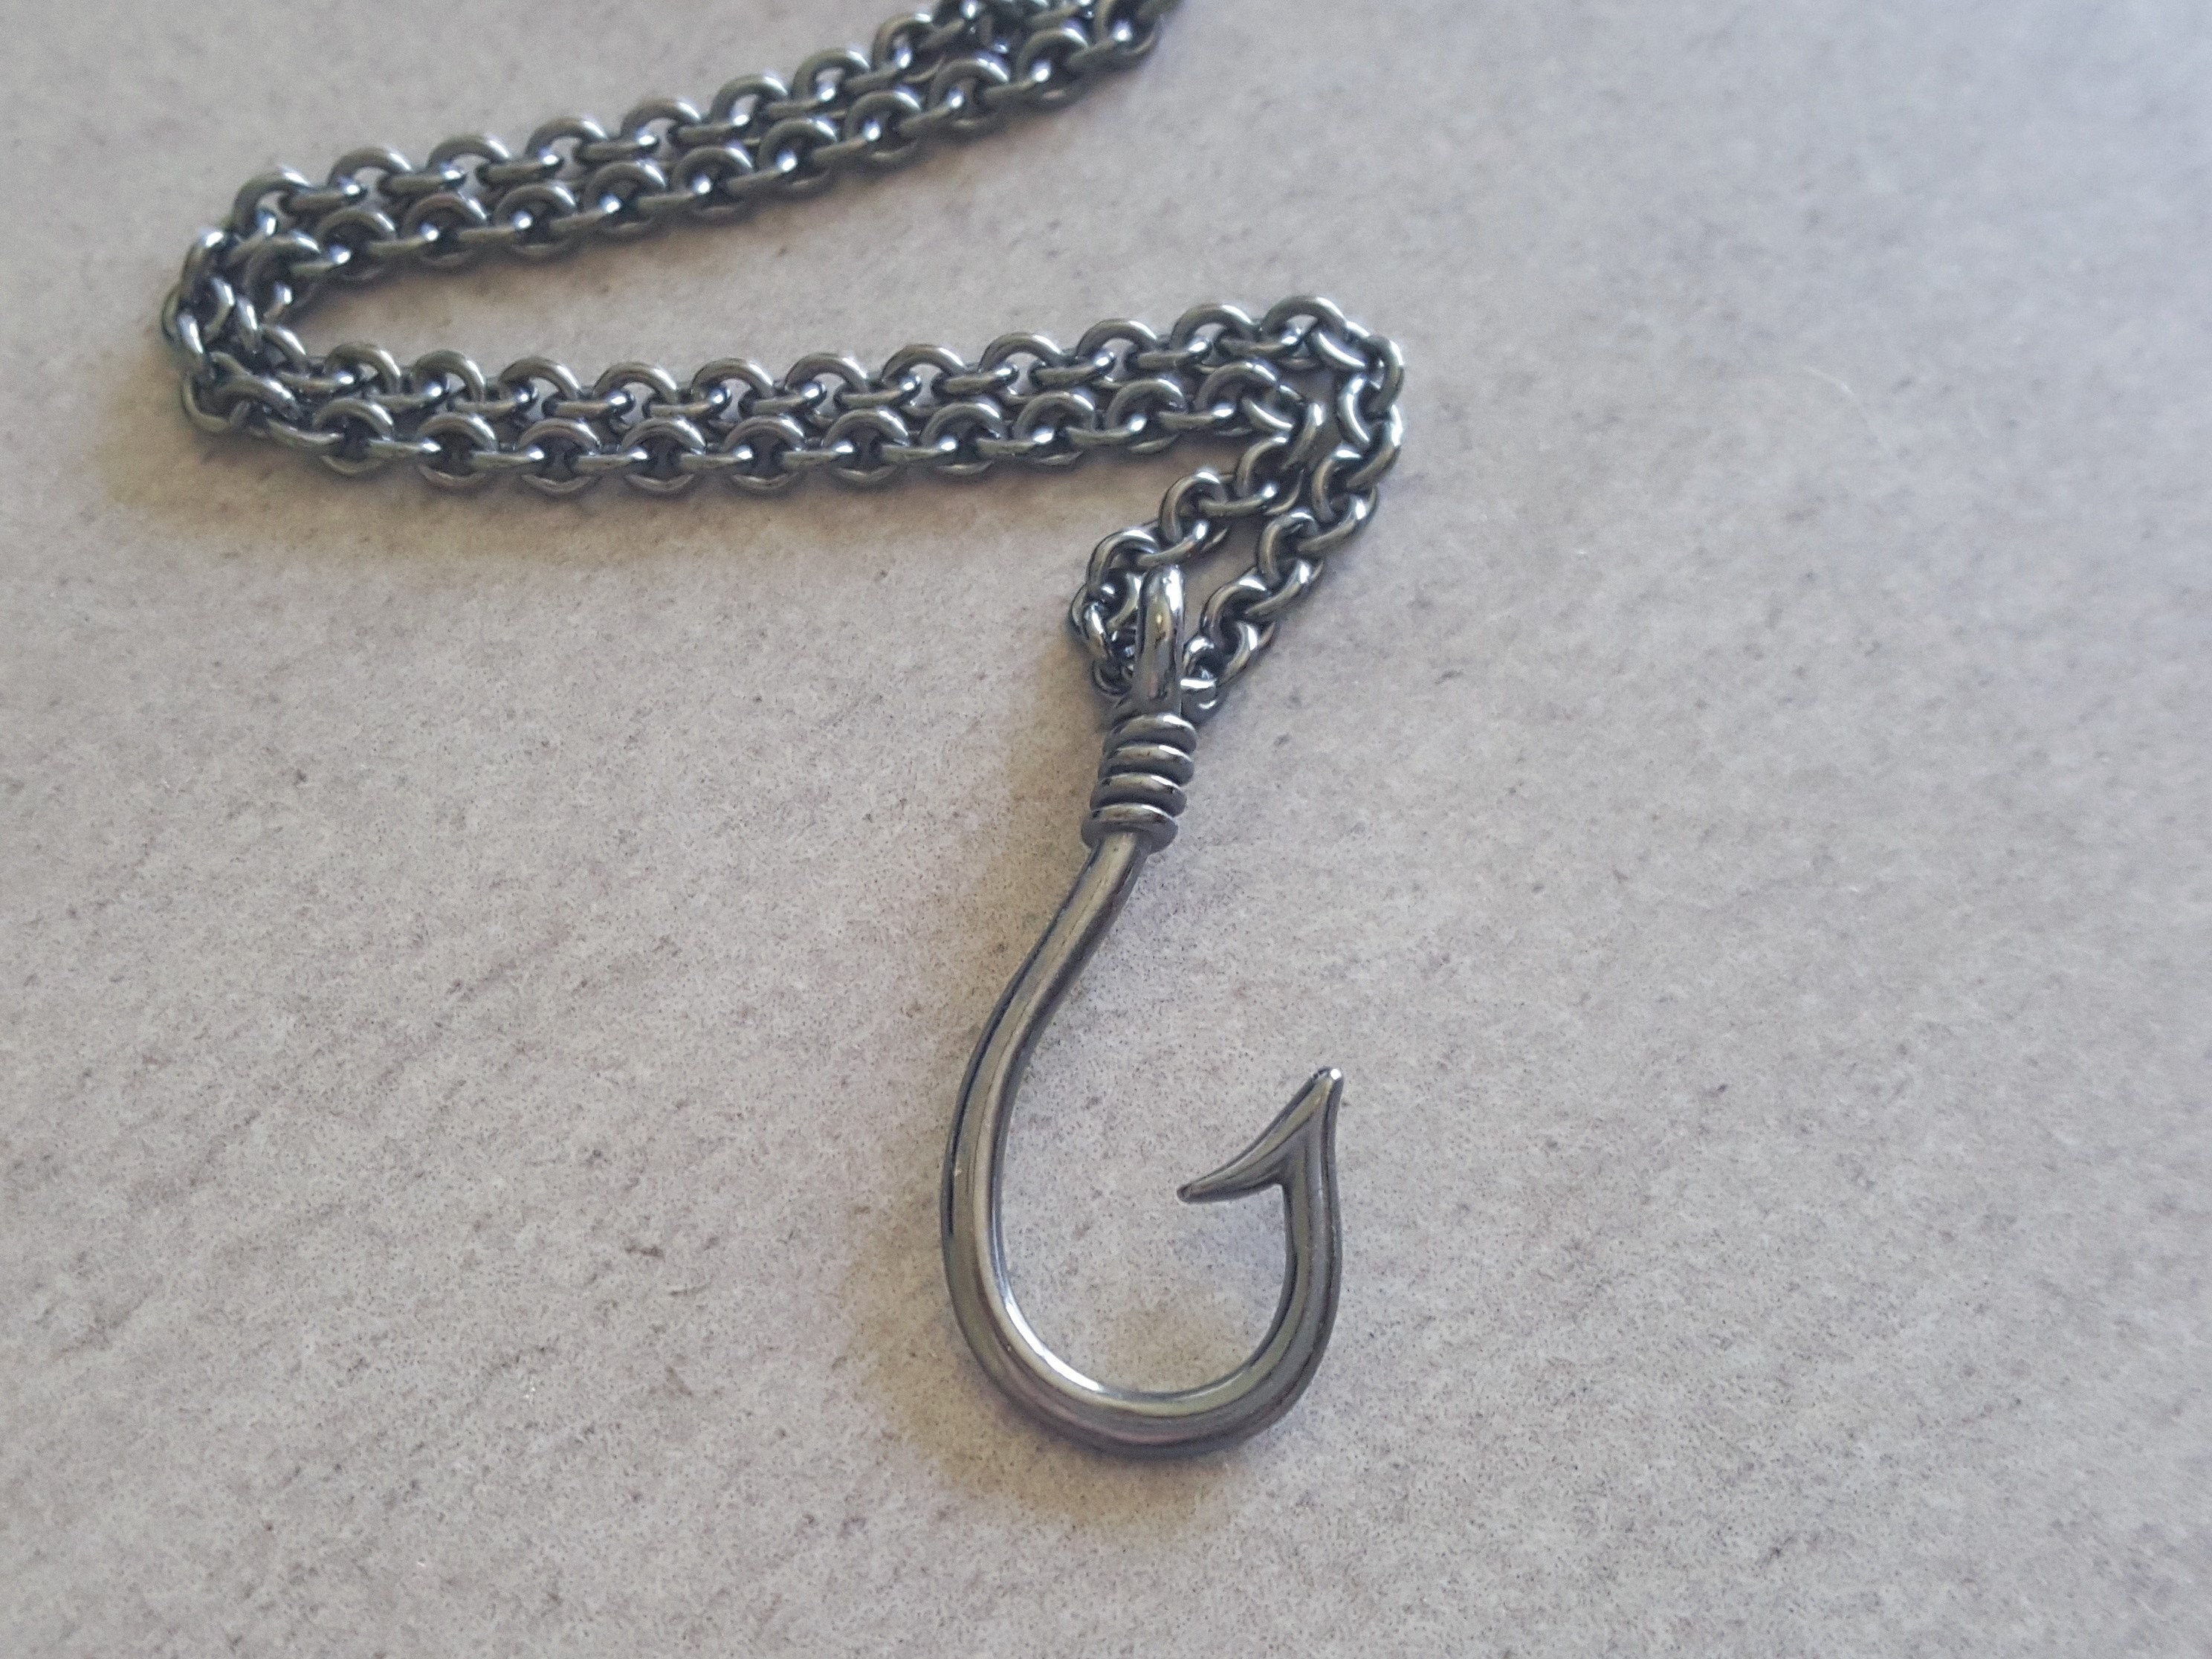 Sterling Silver Fish Hook Necklace, Men's Pendant Oxidized to A Gunmetal Gray On Sturdy Cable Chain